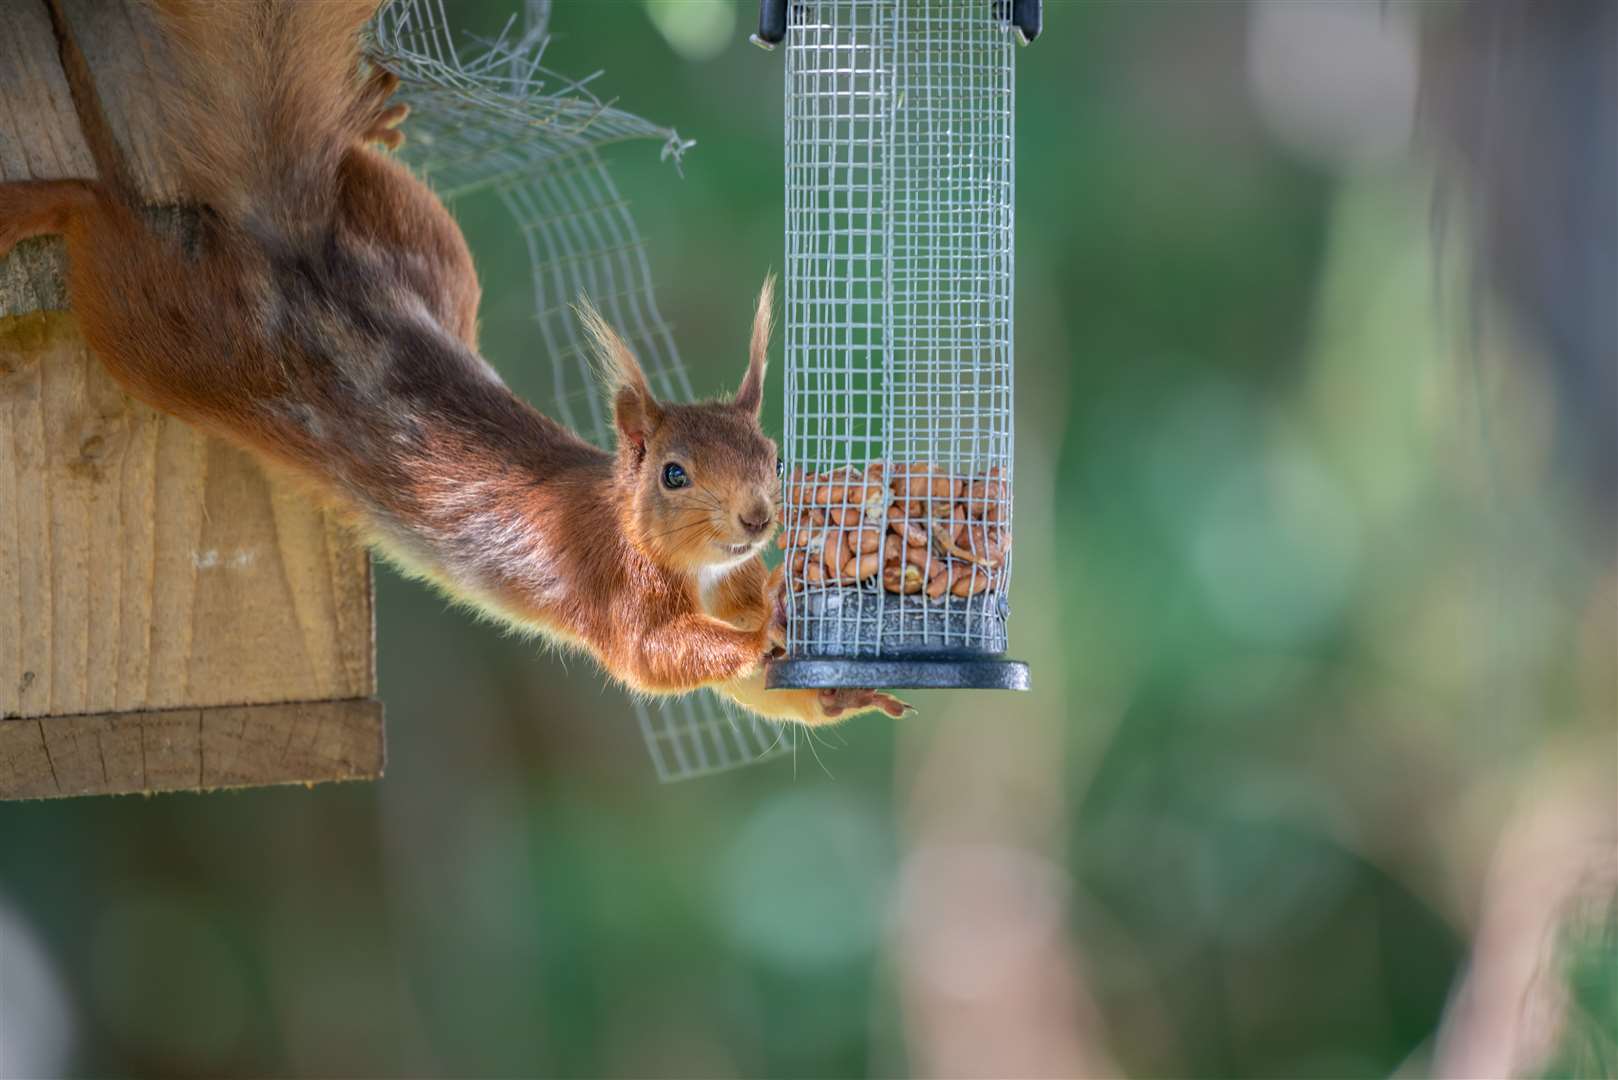 Help red squirrels in winter by leaving a variety of nuts every few days.